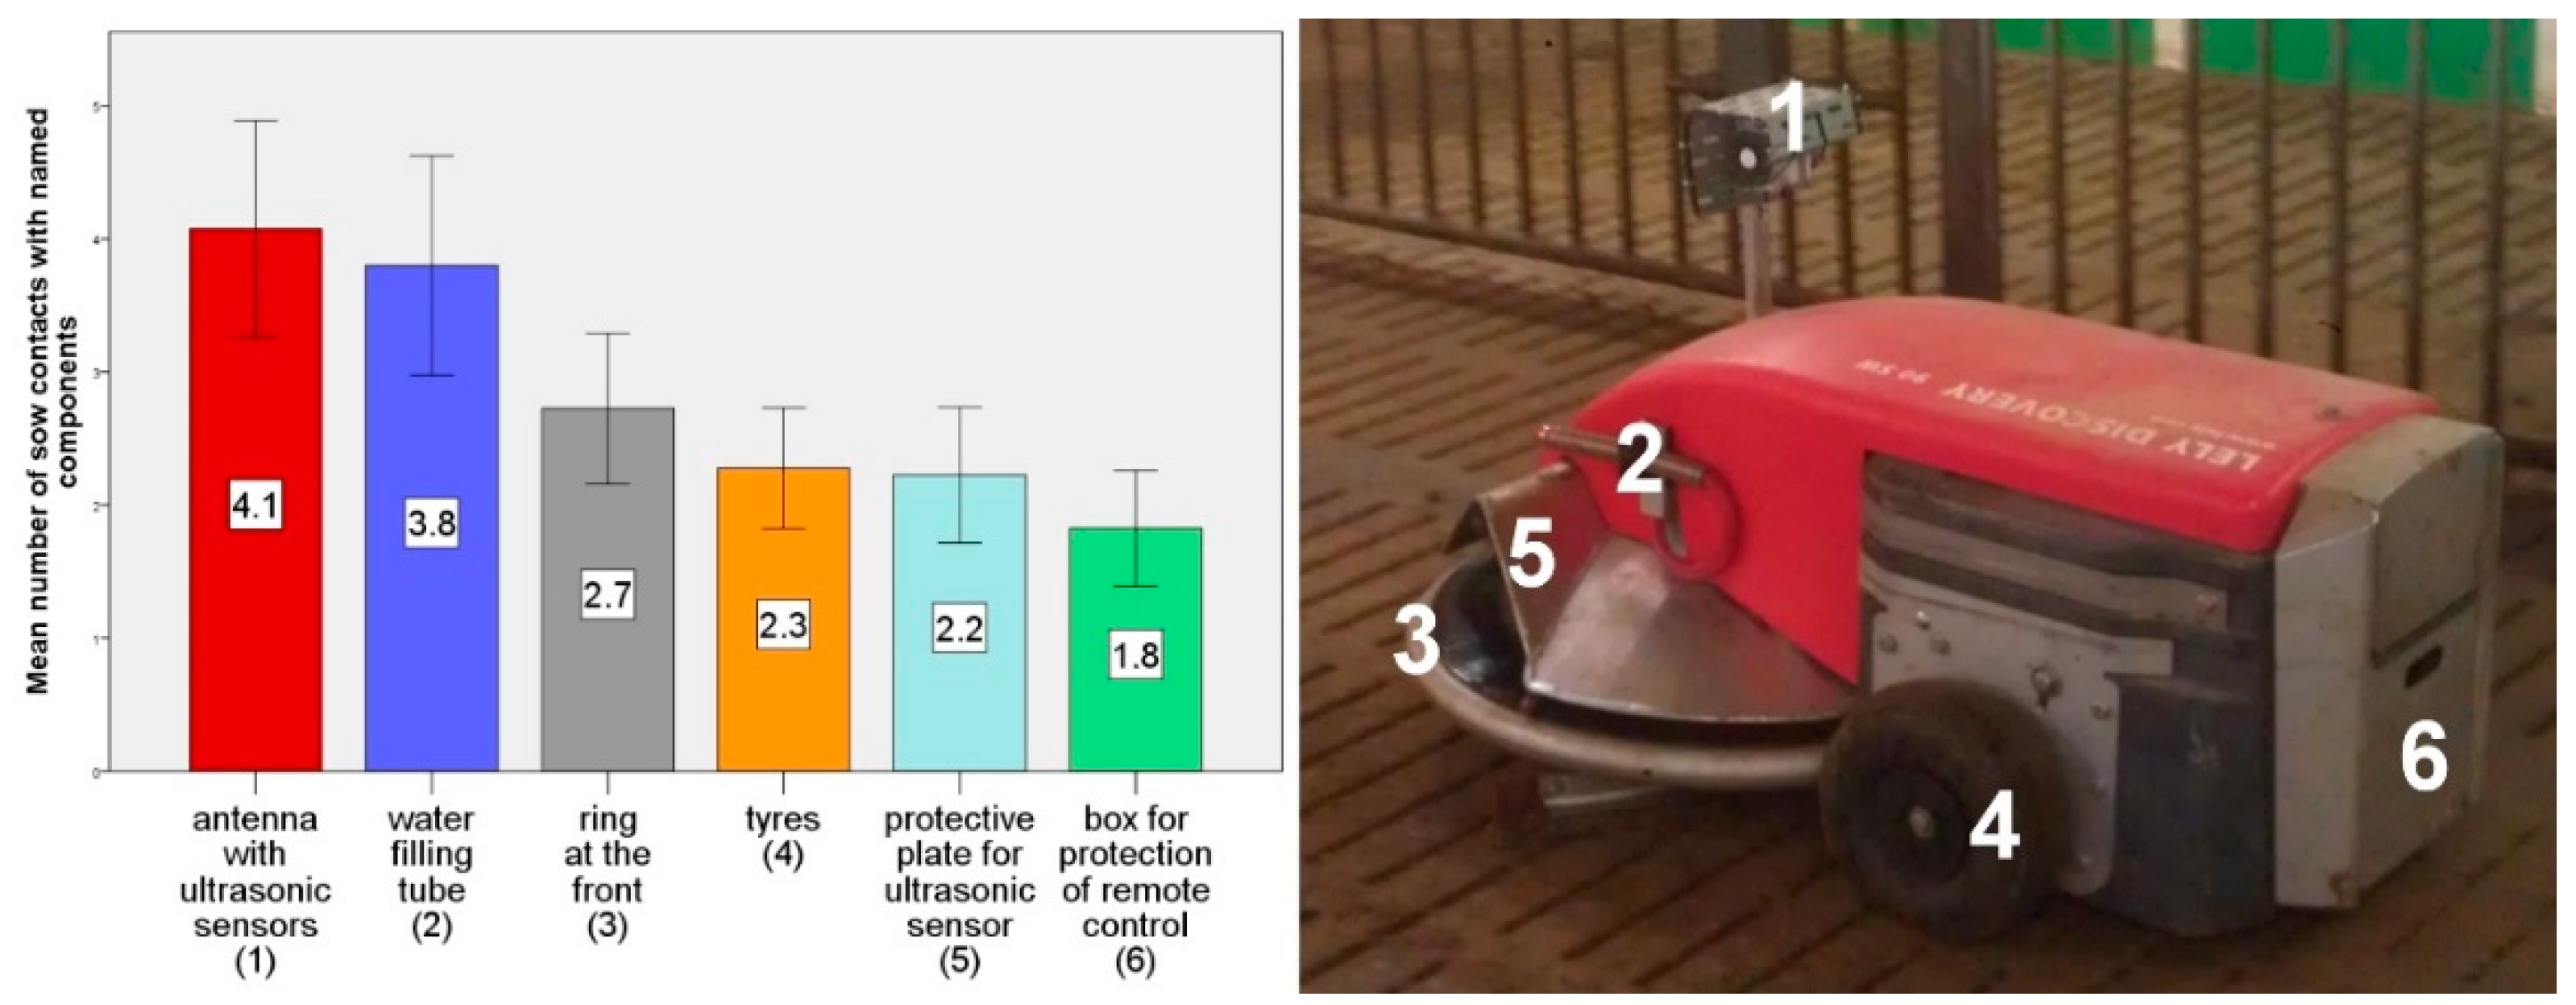 Animals | Free Full-Text | Feasibility Study: Improving Floor Cleanliness  by Using a Robot Scraper in Group-Housed Pregnant Sows and Their Reactions  on the New Device | HTML